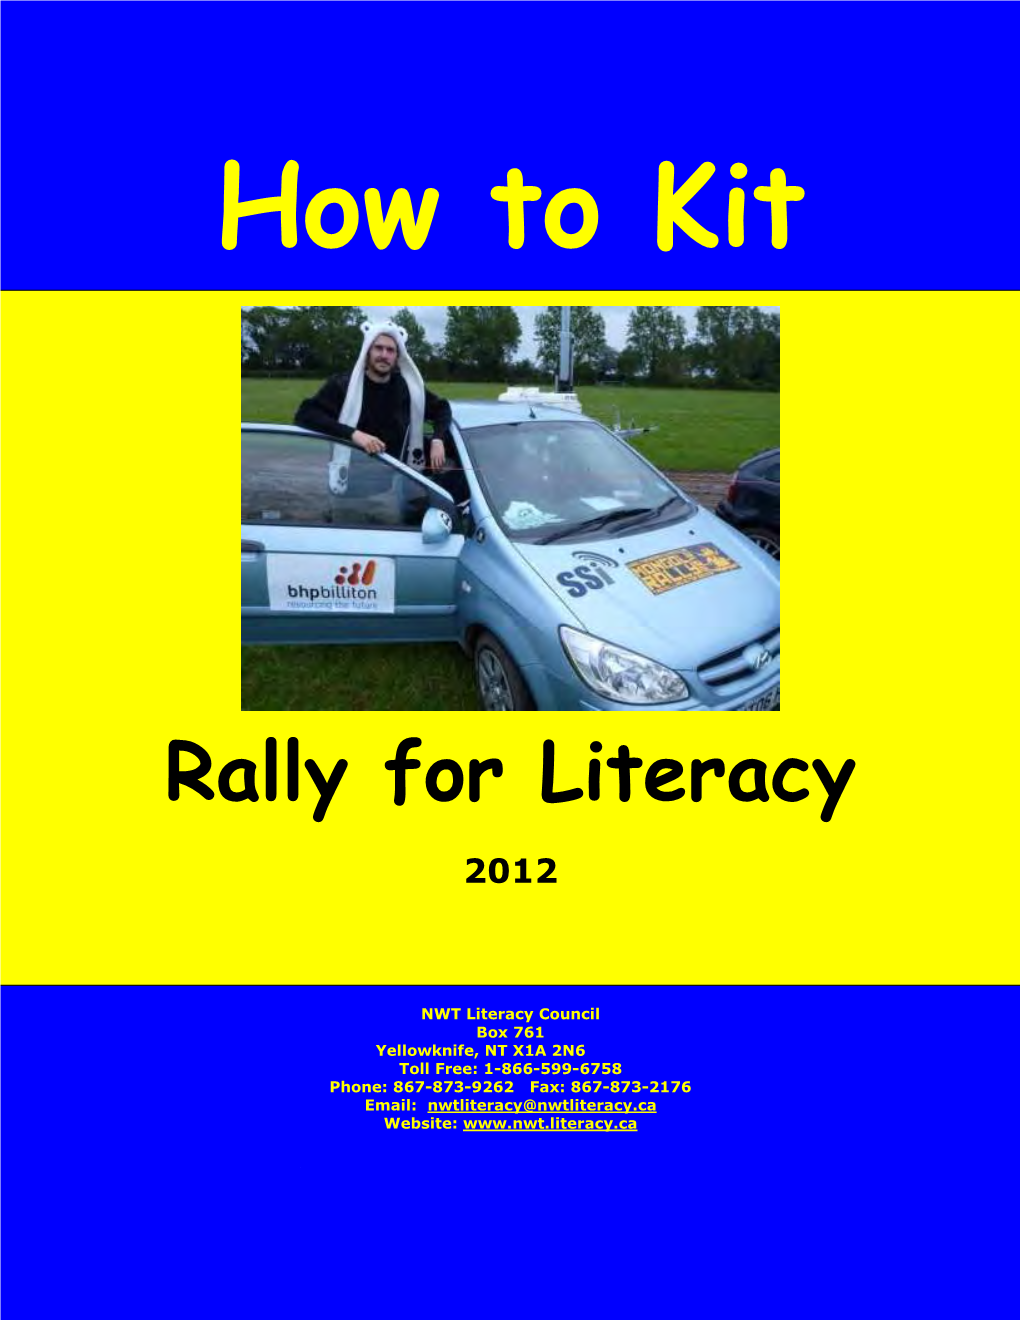 Rally for Literacy